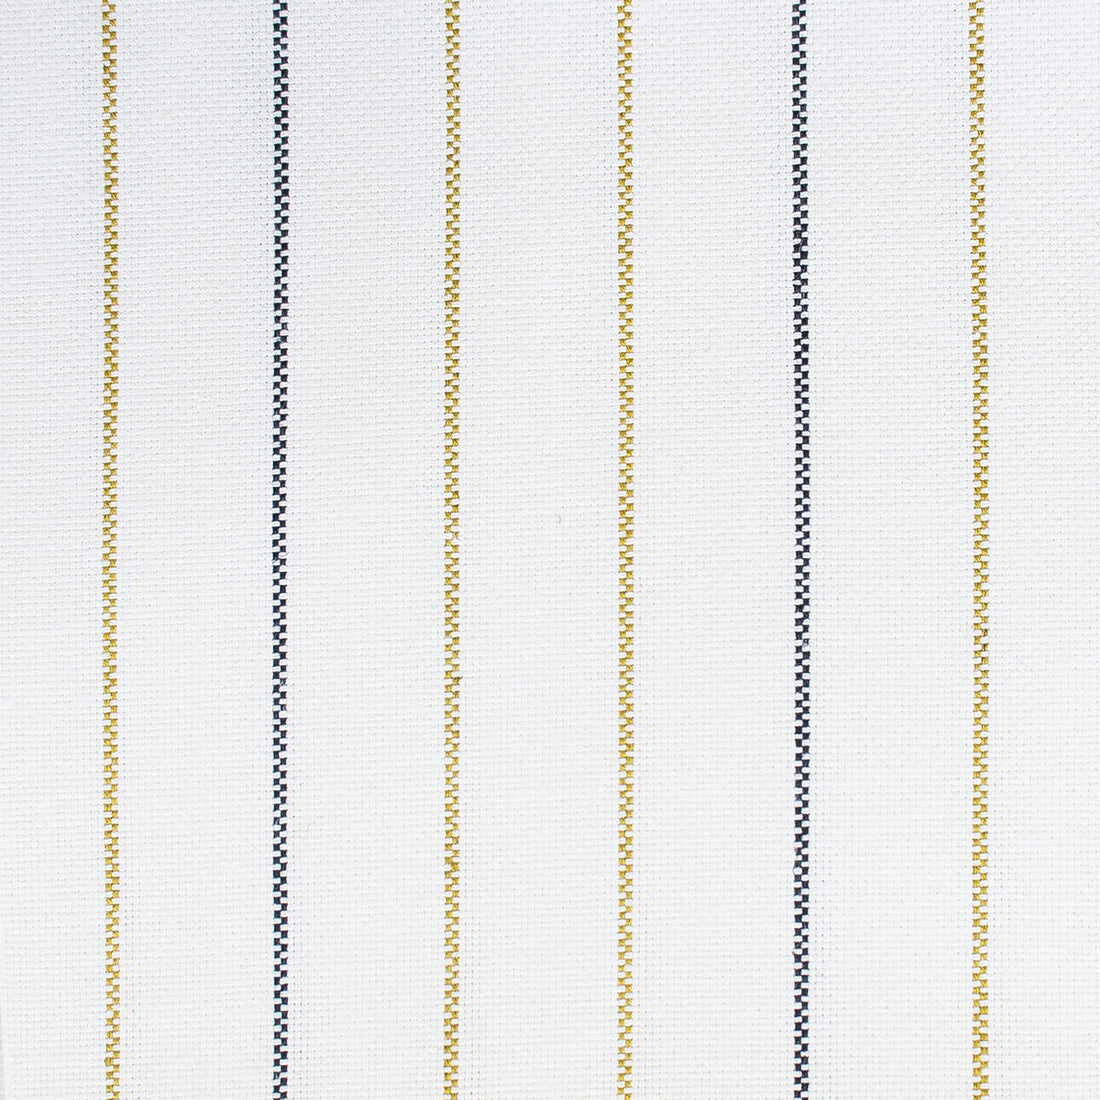 Chicago fabric in oro color - pattern GDT5574.001.0 - by Gaston y Daniela in the Gaston Luis Bustamante collection